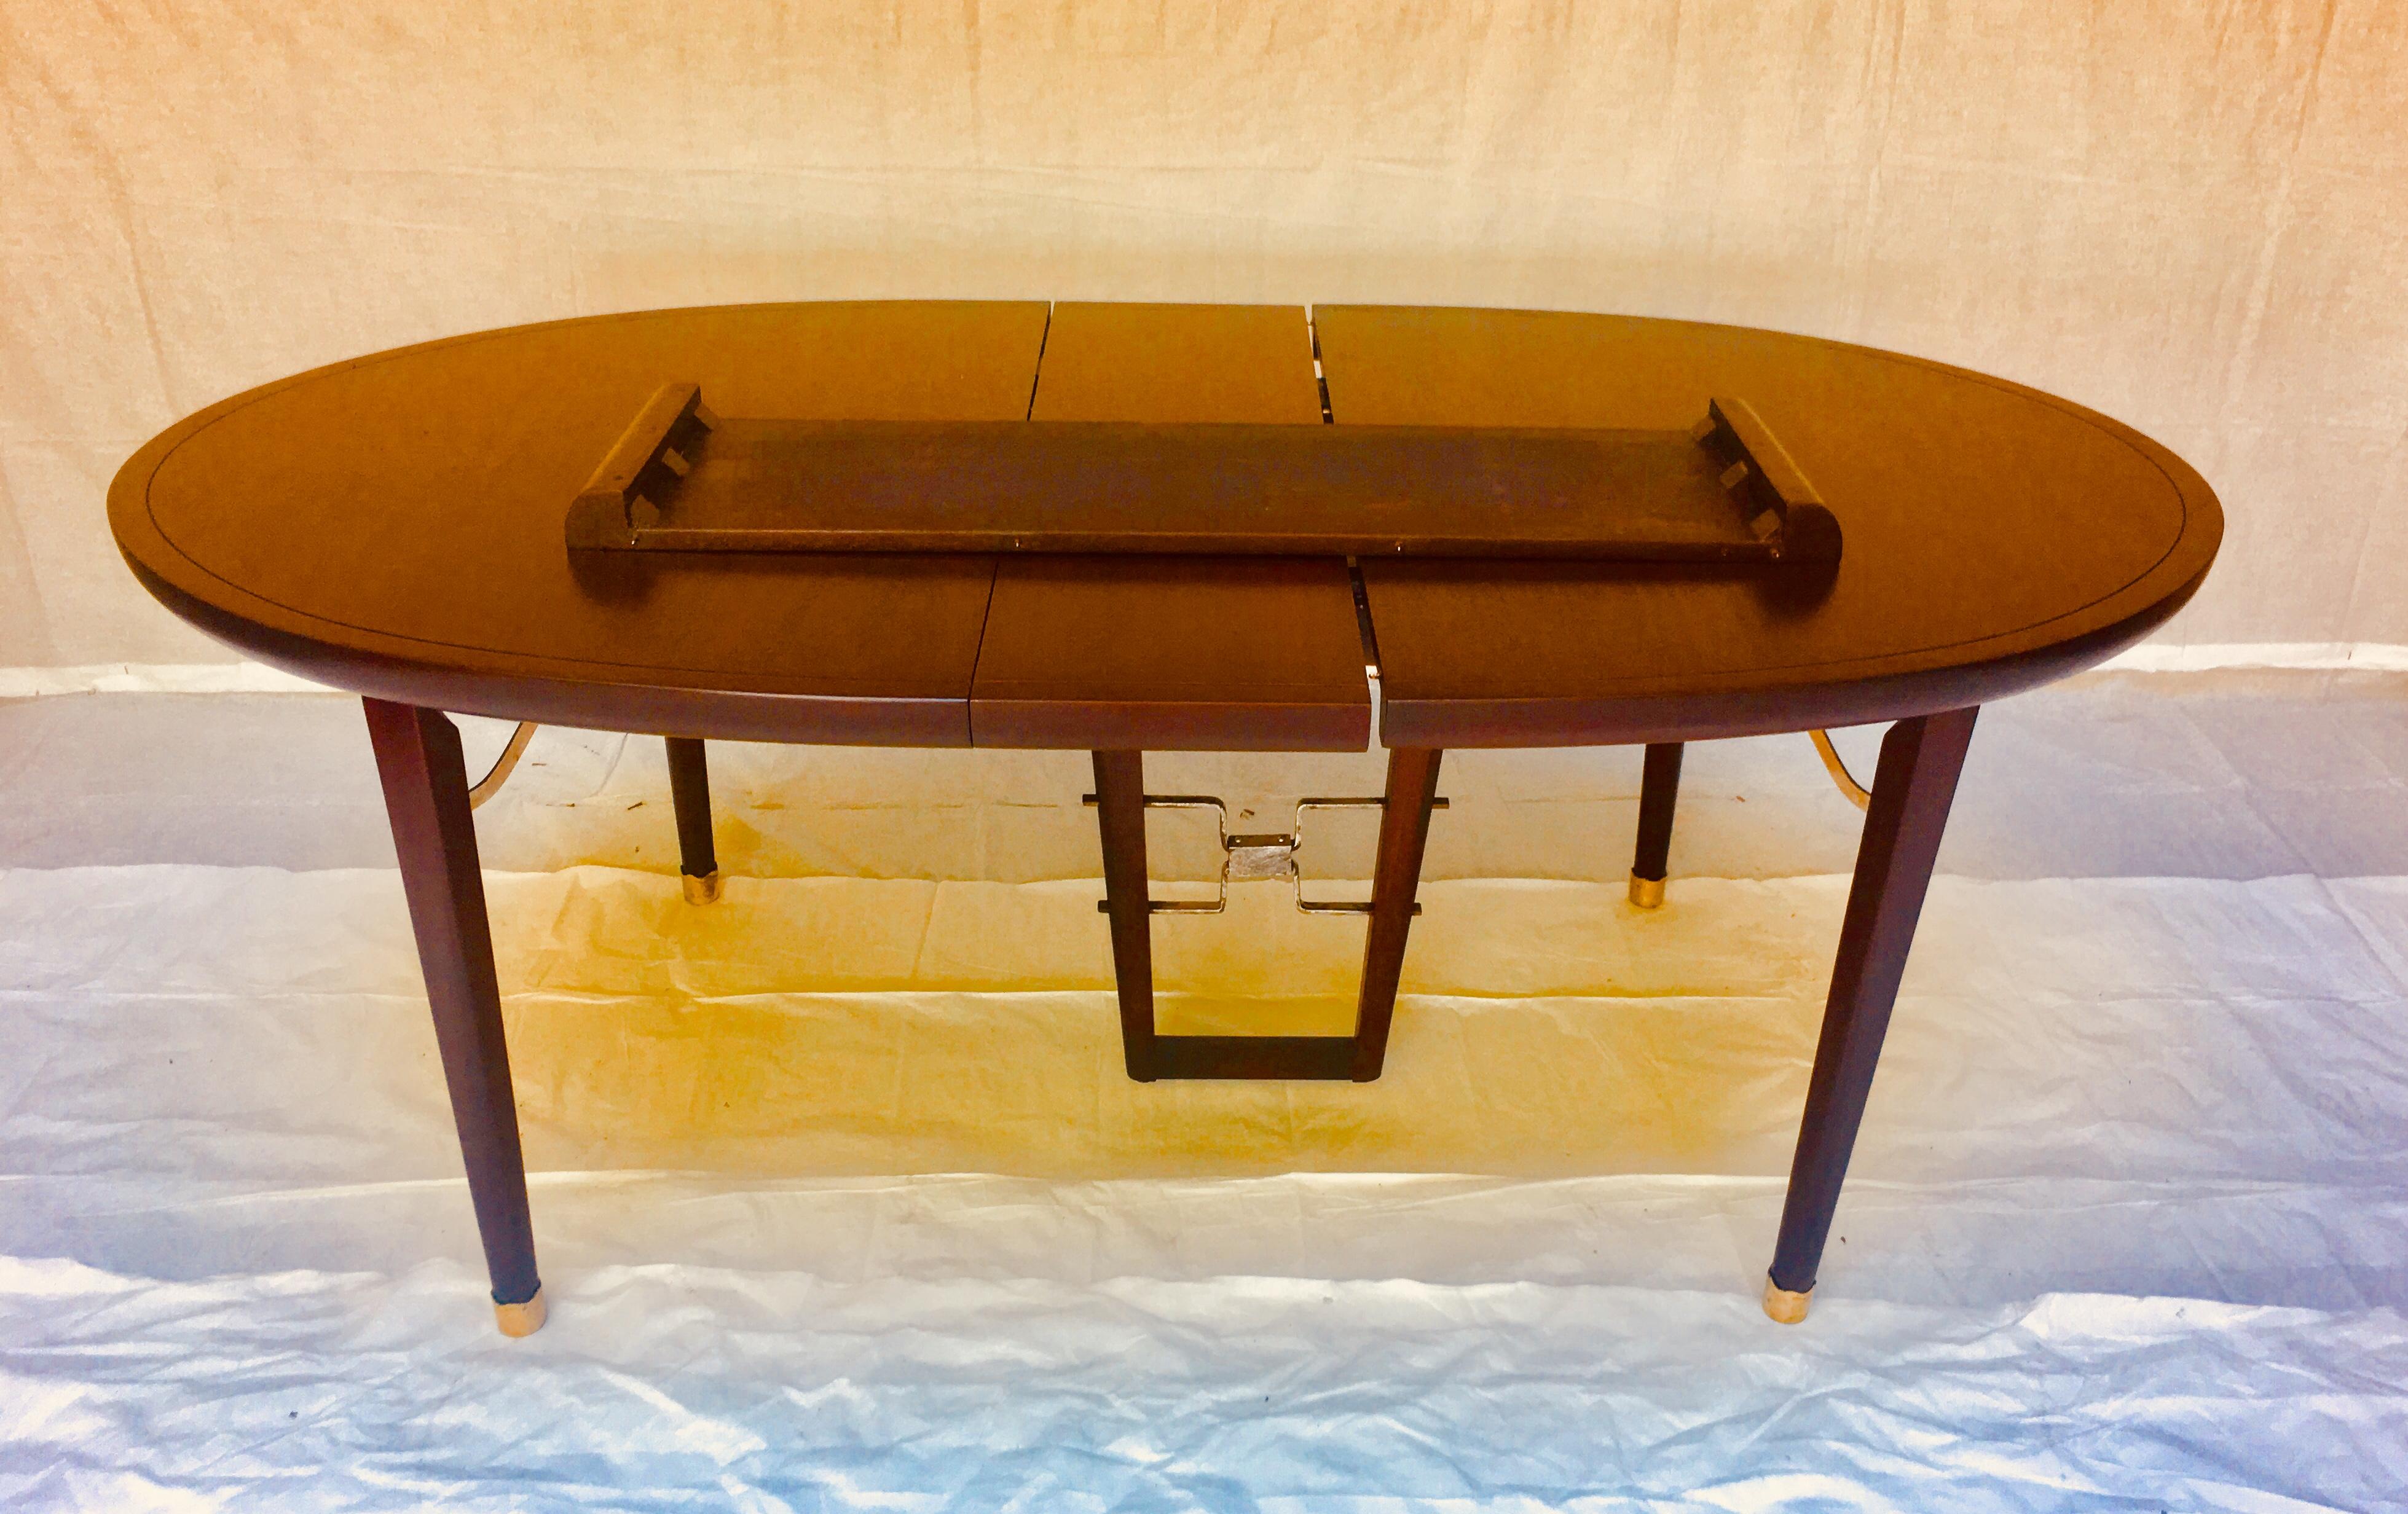 Edmond Spence Six Piece Mahogany Dinning Set for Industria Mueblera, S.A. 1950s  For Sale 2